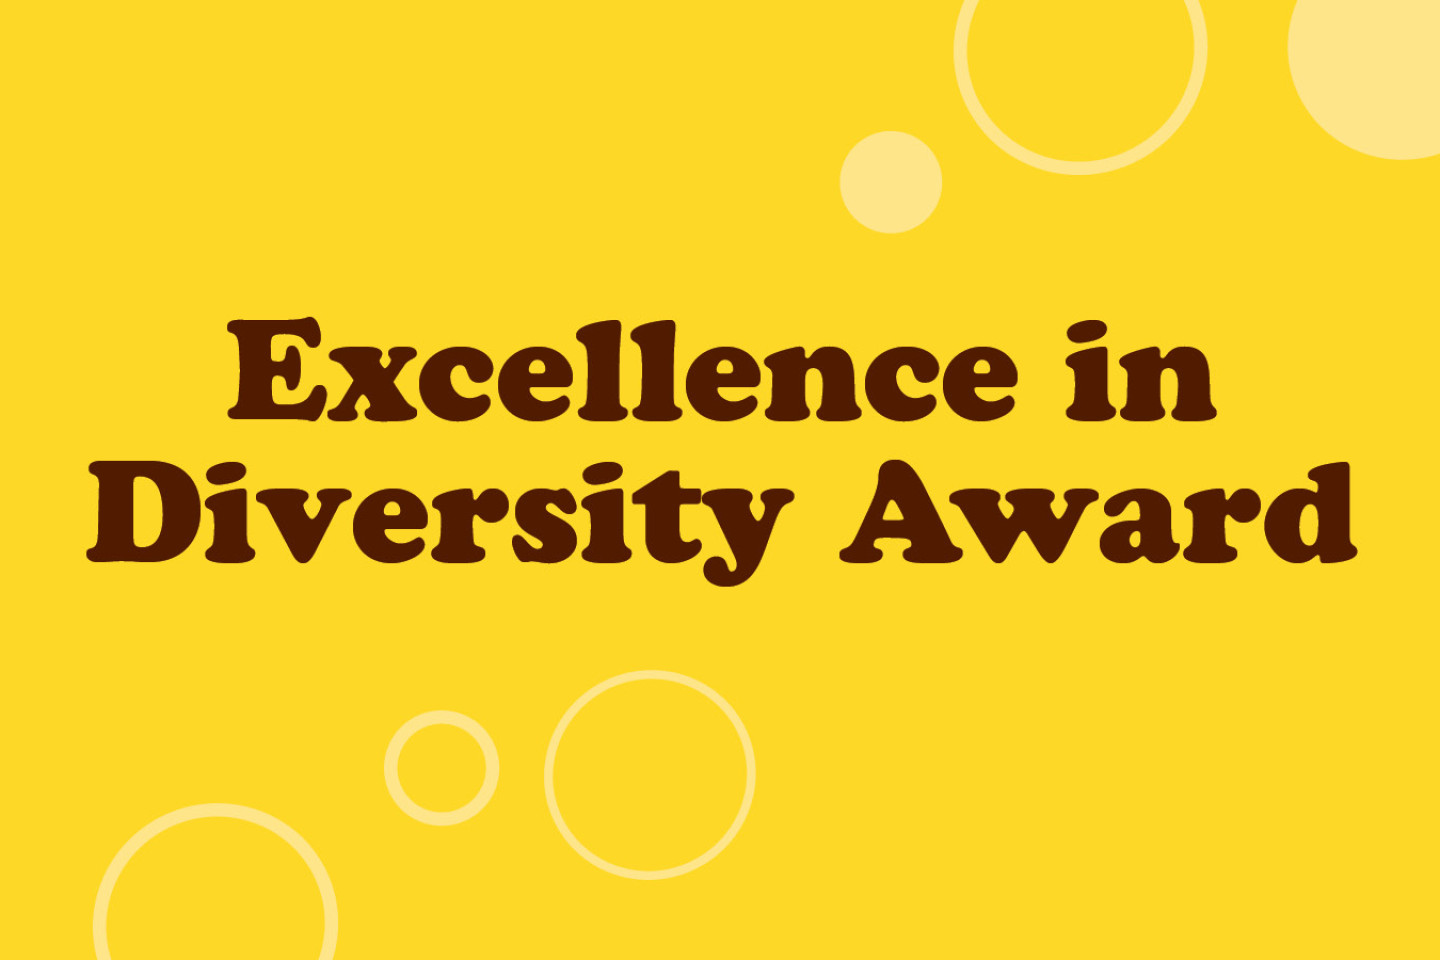 Excellence in Diversity Award